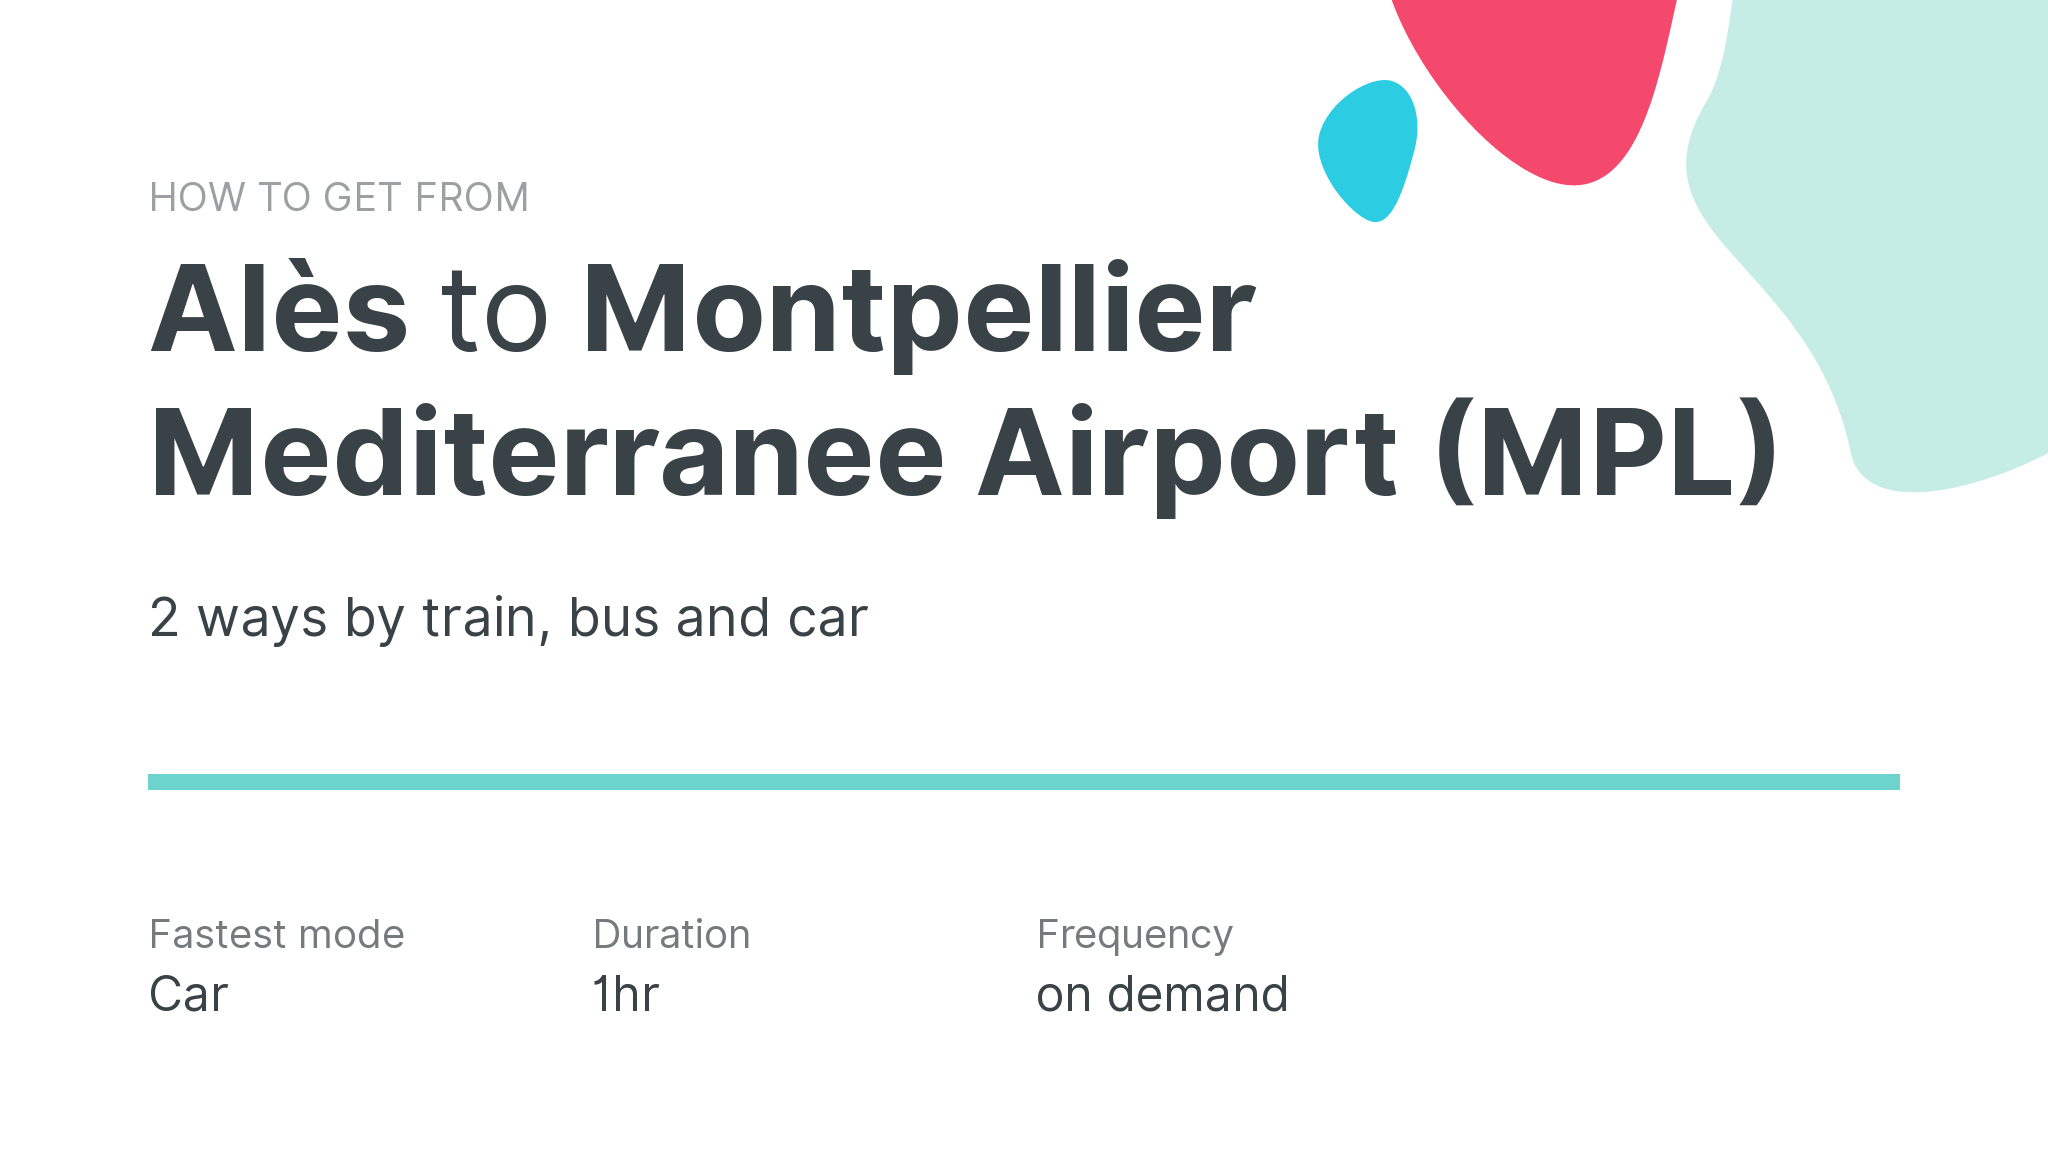 How do I get from Alès to Montpellier Mediterranee Airport (MPL)